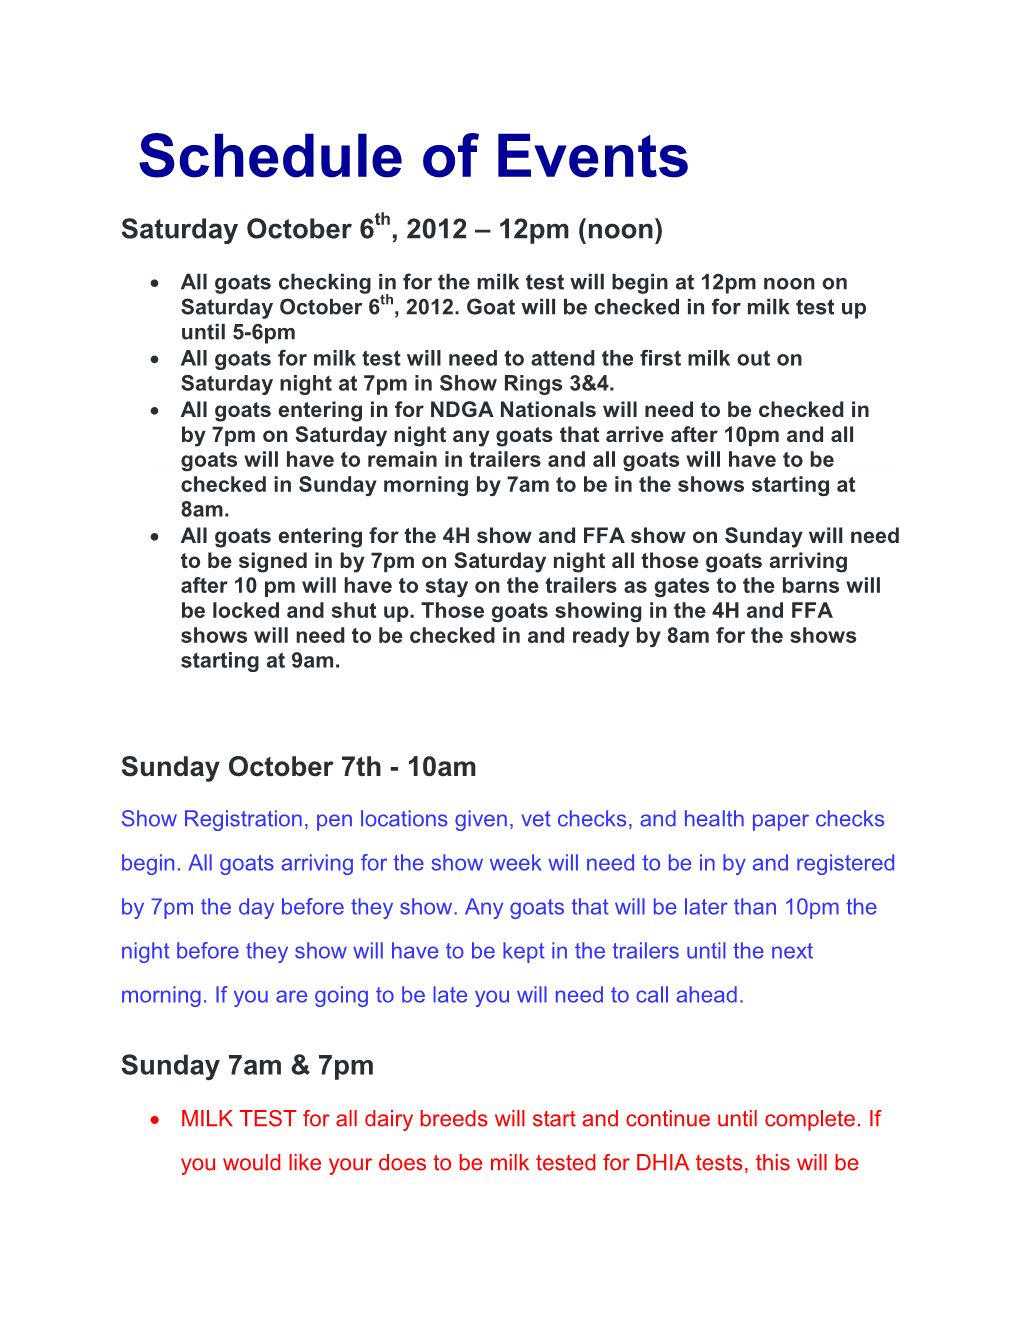 Schedule of Events Saturday October 6Th, 2012 – 12Pm (Noon)